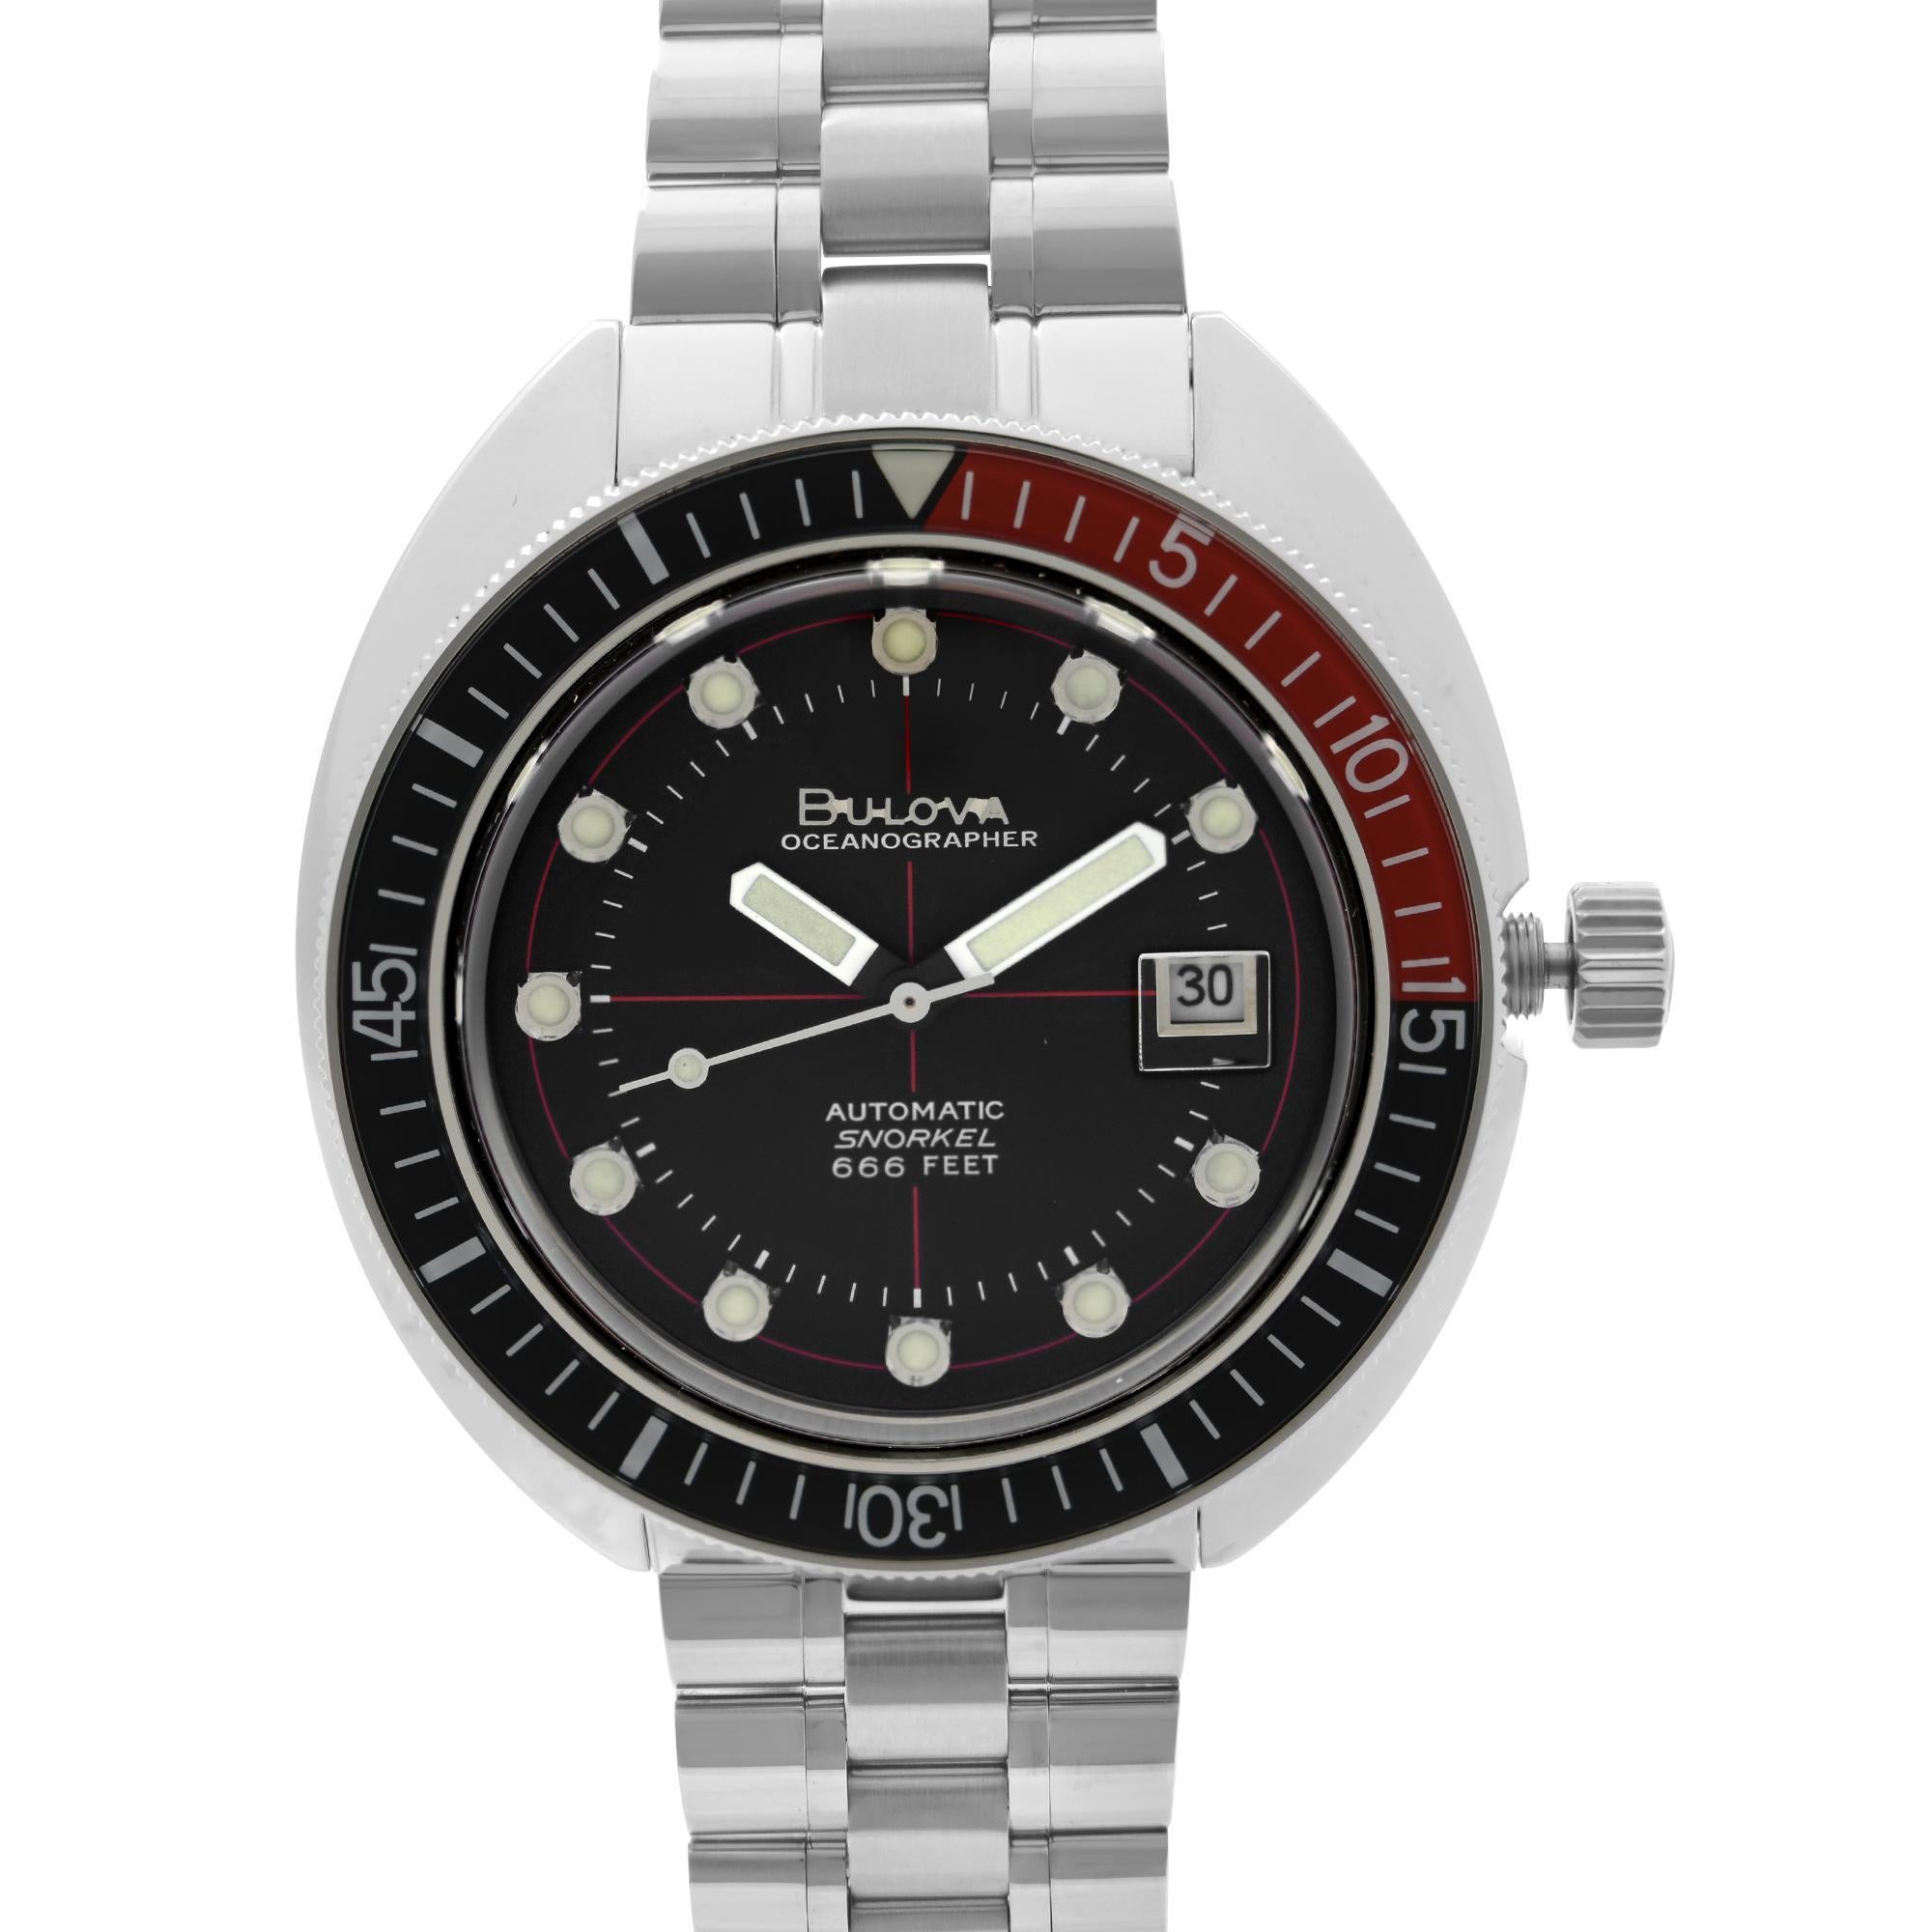 New with Defects Oceanographer Devil Diver Steel Black Dial Automatic Men's Watch 98B320. Small Blemish on the Bezel at 7 o'clock position Under Closer Inspection. This Beautiful Timepiece Features: Stainless Steel Case with a Stainless Steel